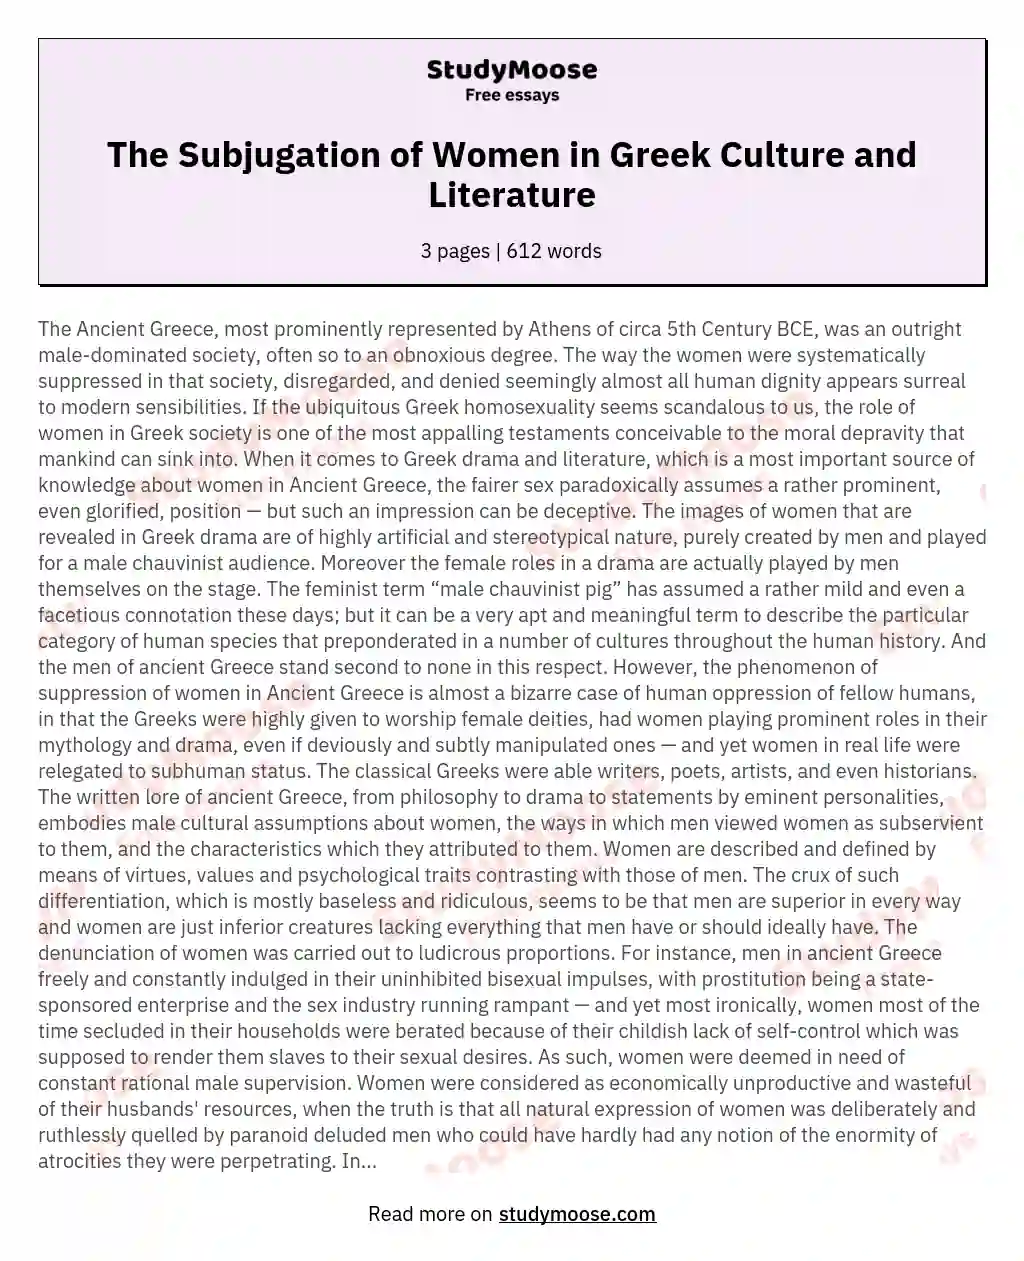 The Subjugation of Women in Greek Culture and Literature essay